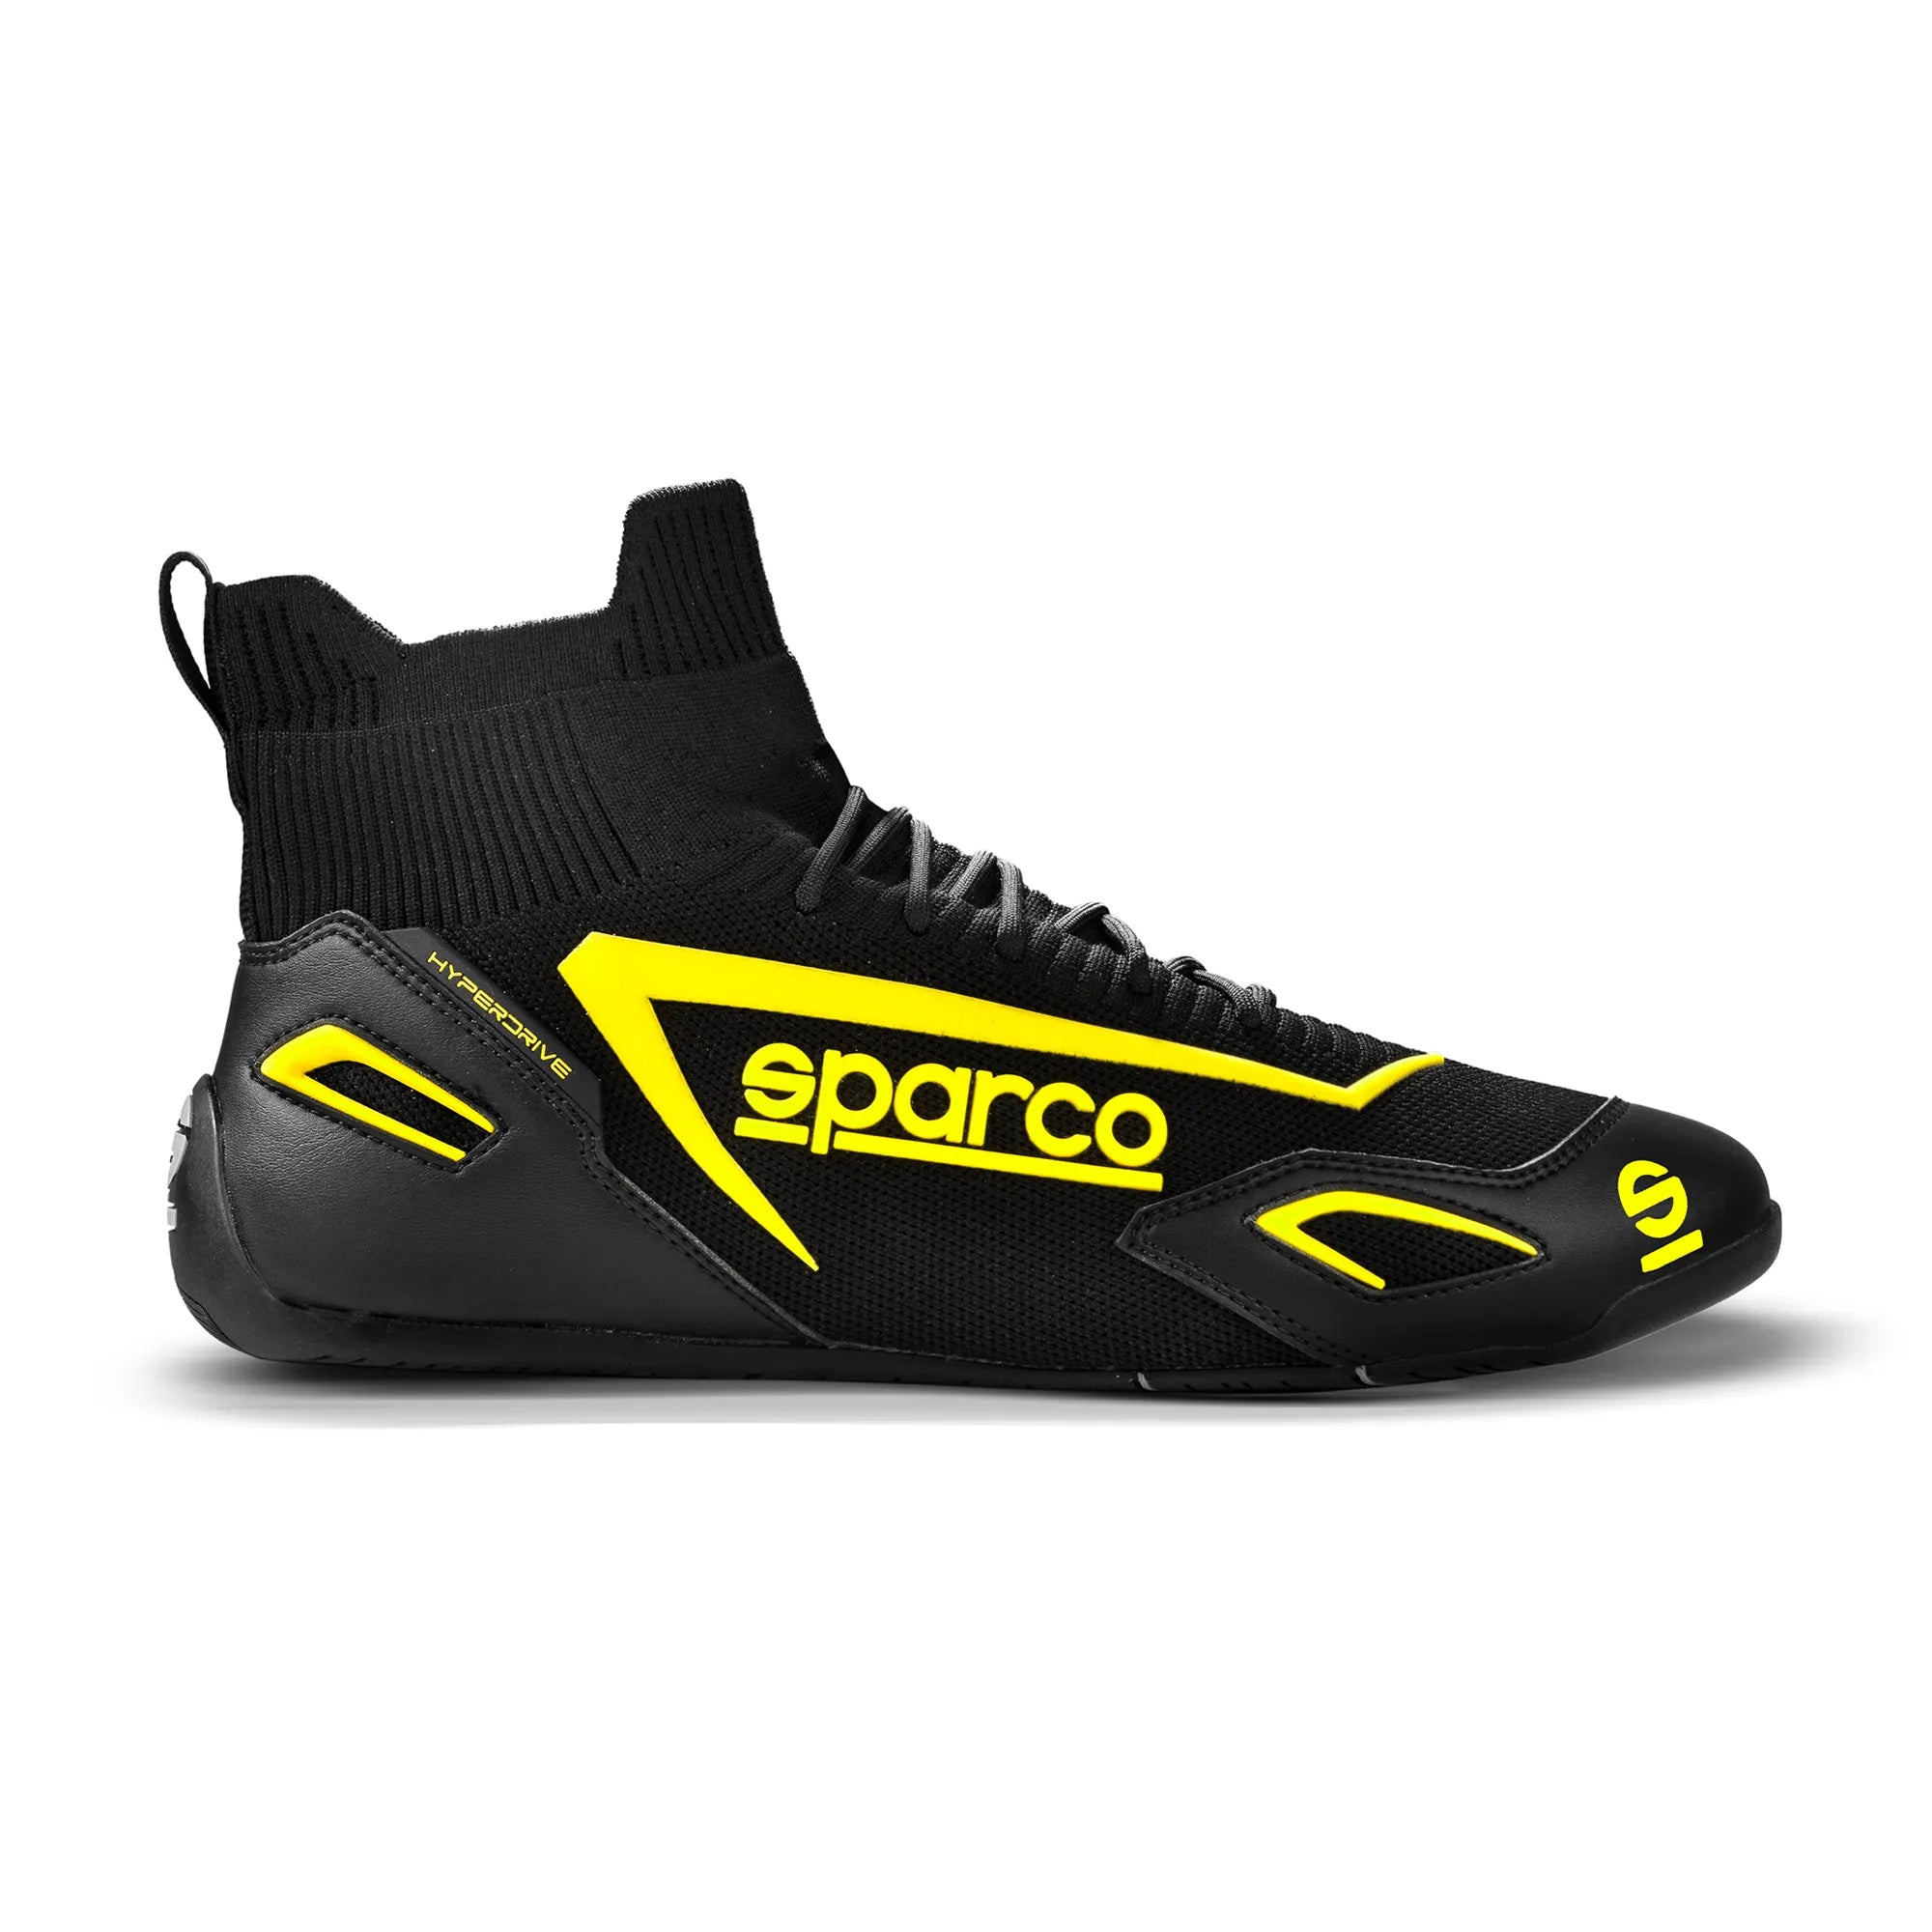 SPARCO 00129341NRGF Gaming sim racing shoes HYPERDRIVE, black/yellow, size 41 Photo-0 